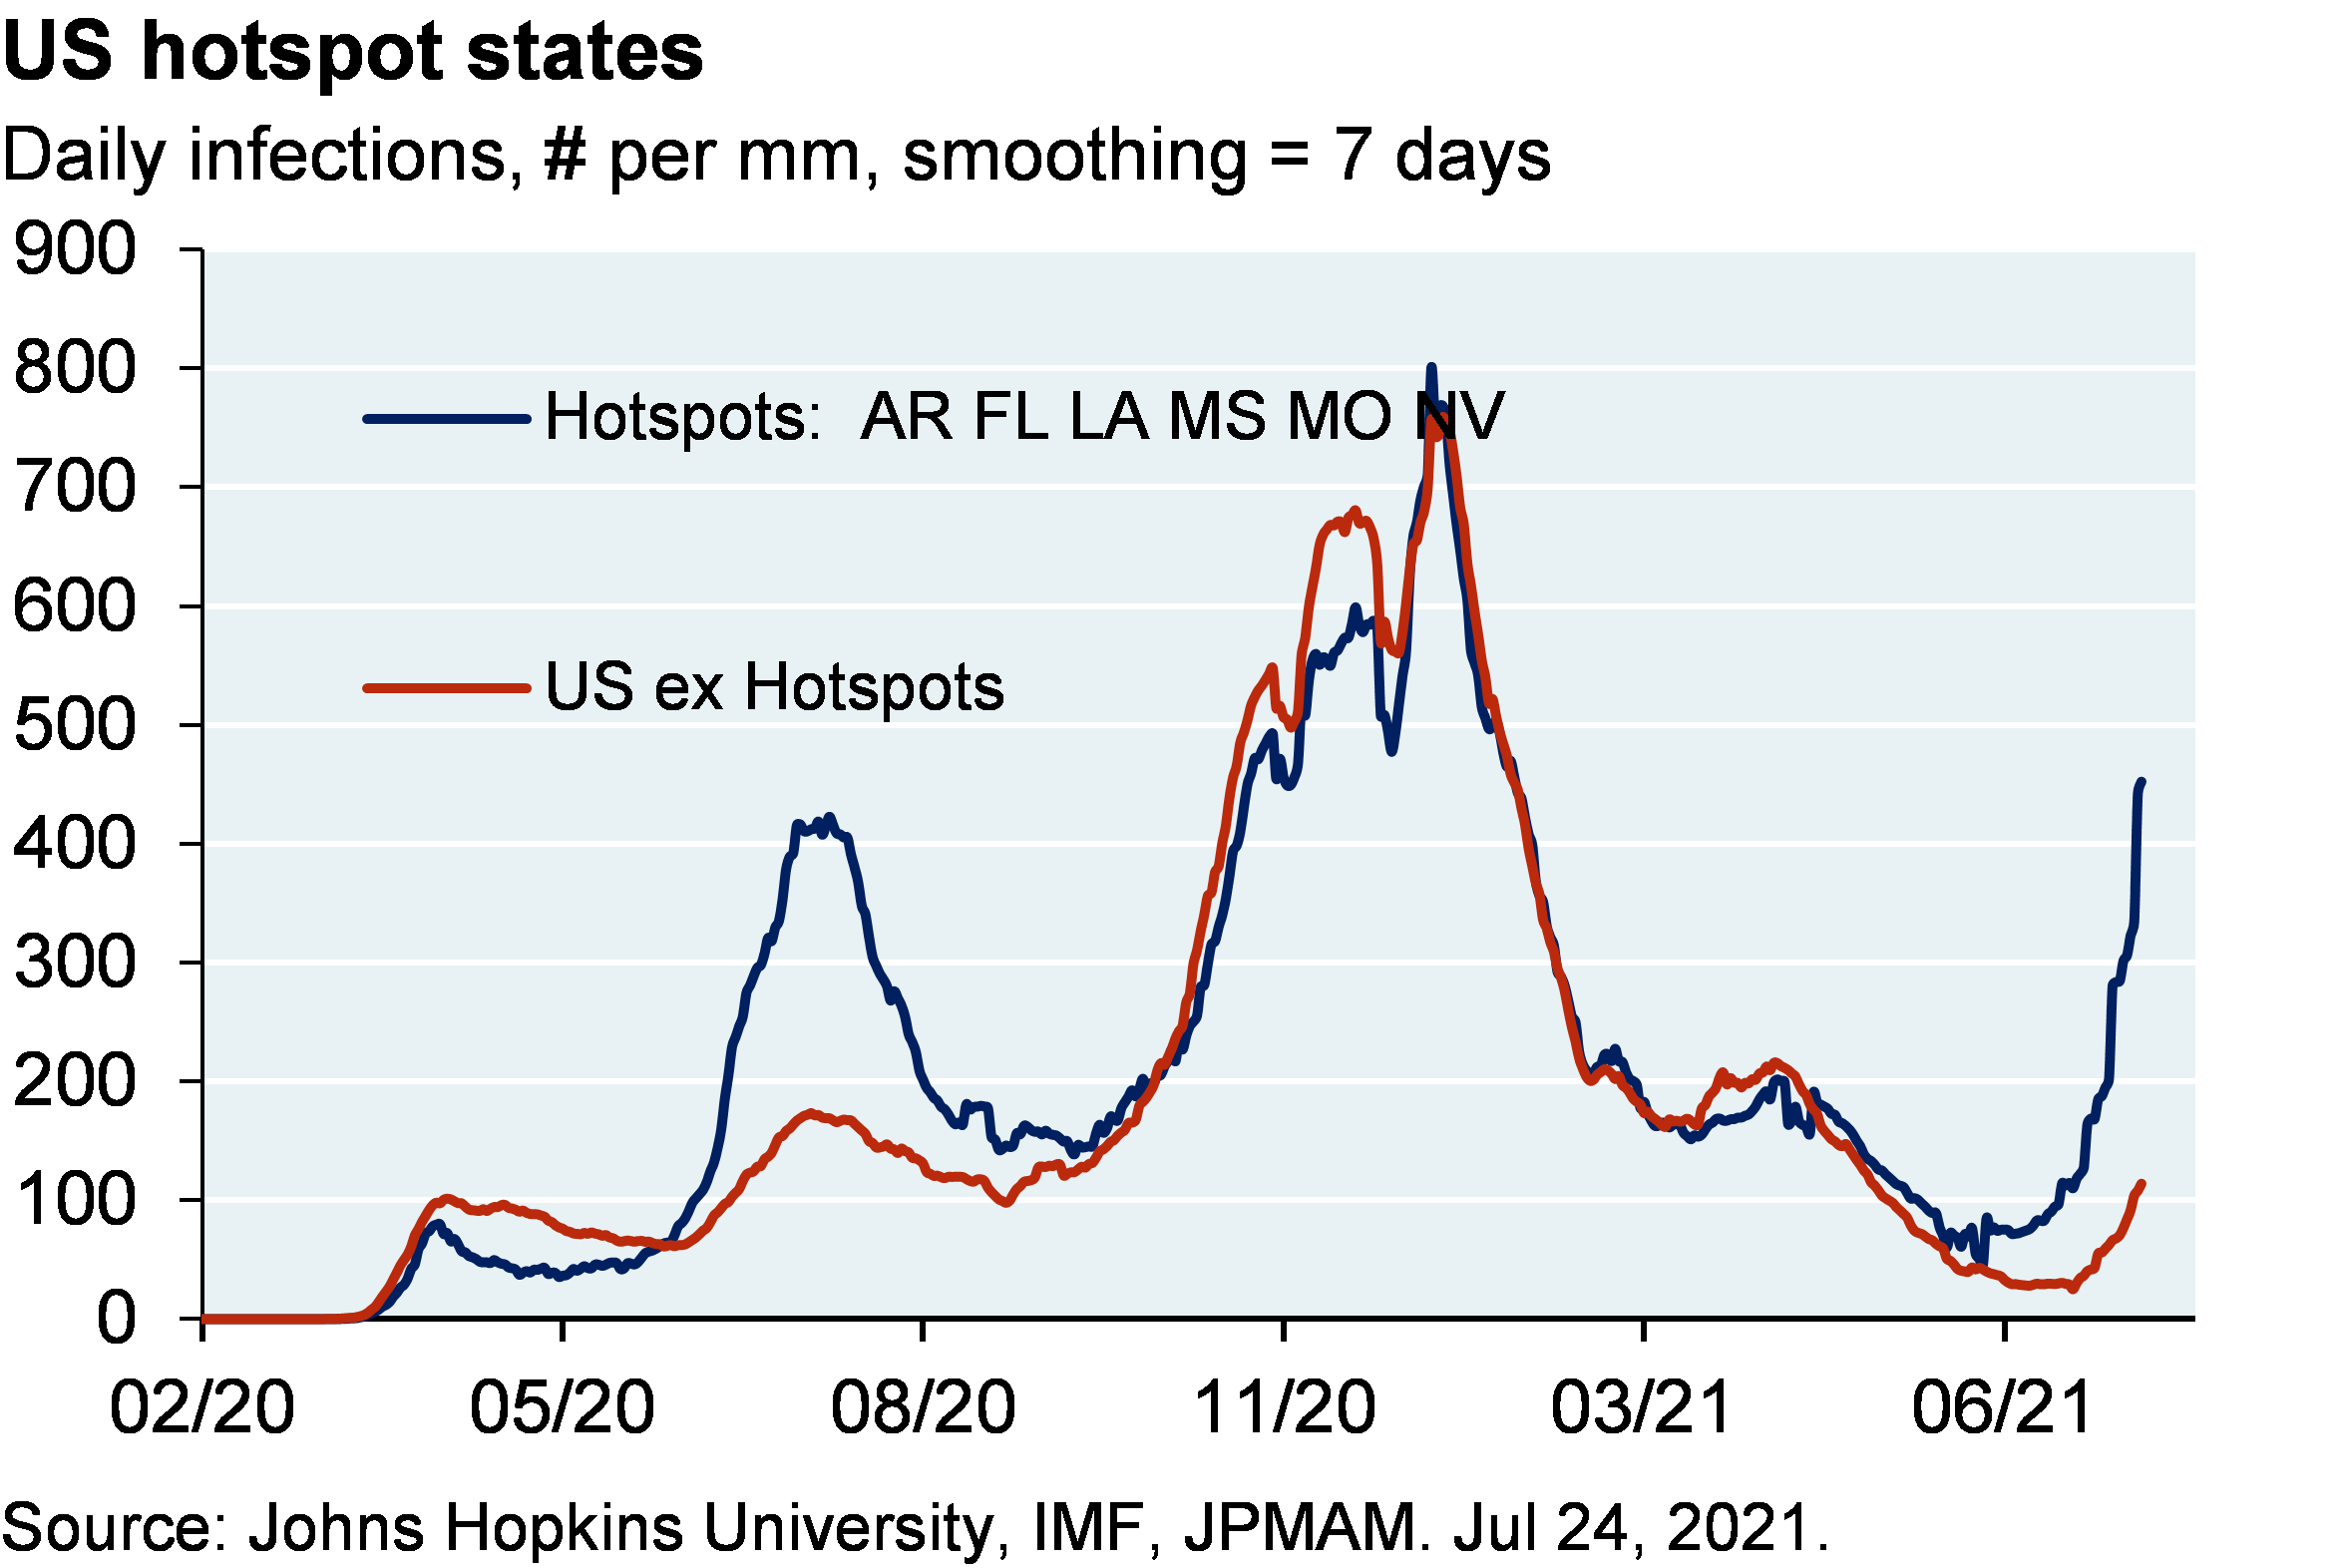 Line chart shows daily infection per million in US hotspot states compared to the US ex hotspot states. Hotspot states include Arkansas, Florida, Louisiana, Mississippi, Missouri and Nevada. At their most recent point, the hotspot states have seen a spike to almost 450 infections per million compared to 100 infections per million among the US ex hotspot states. 